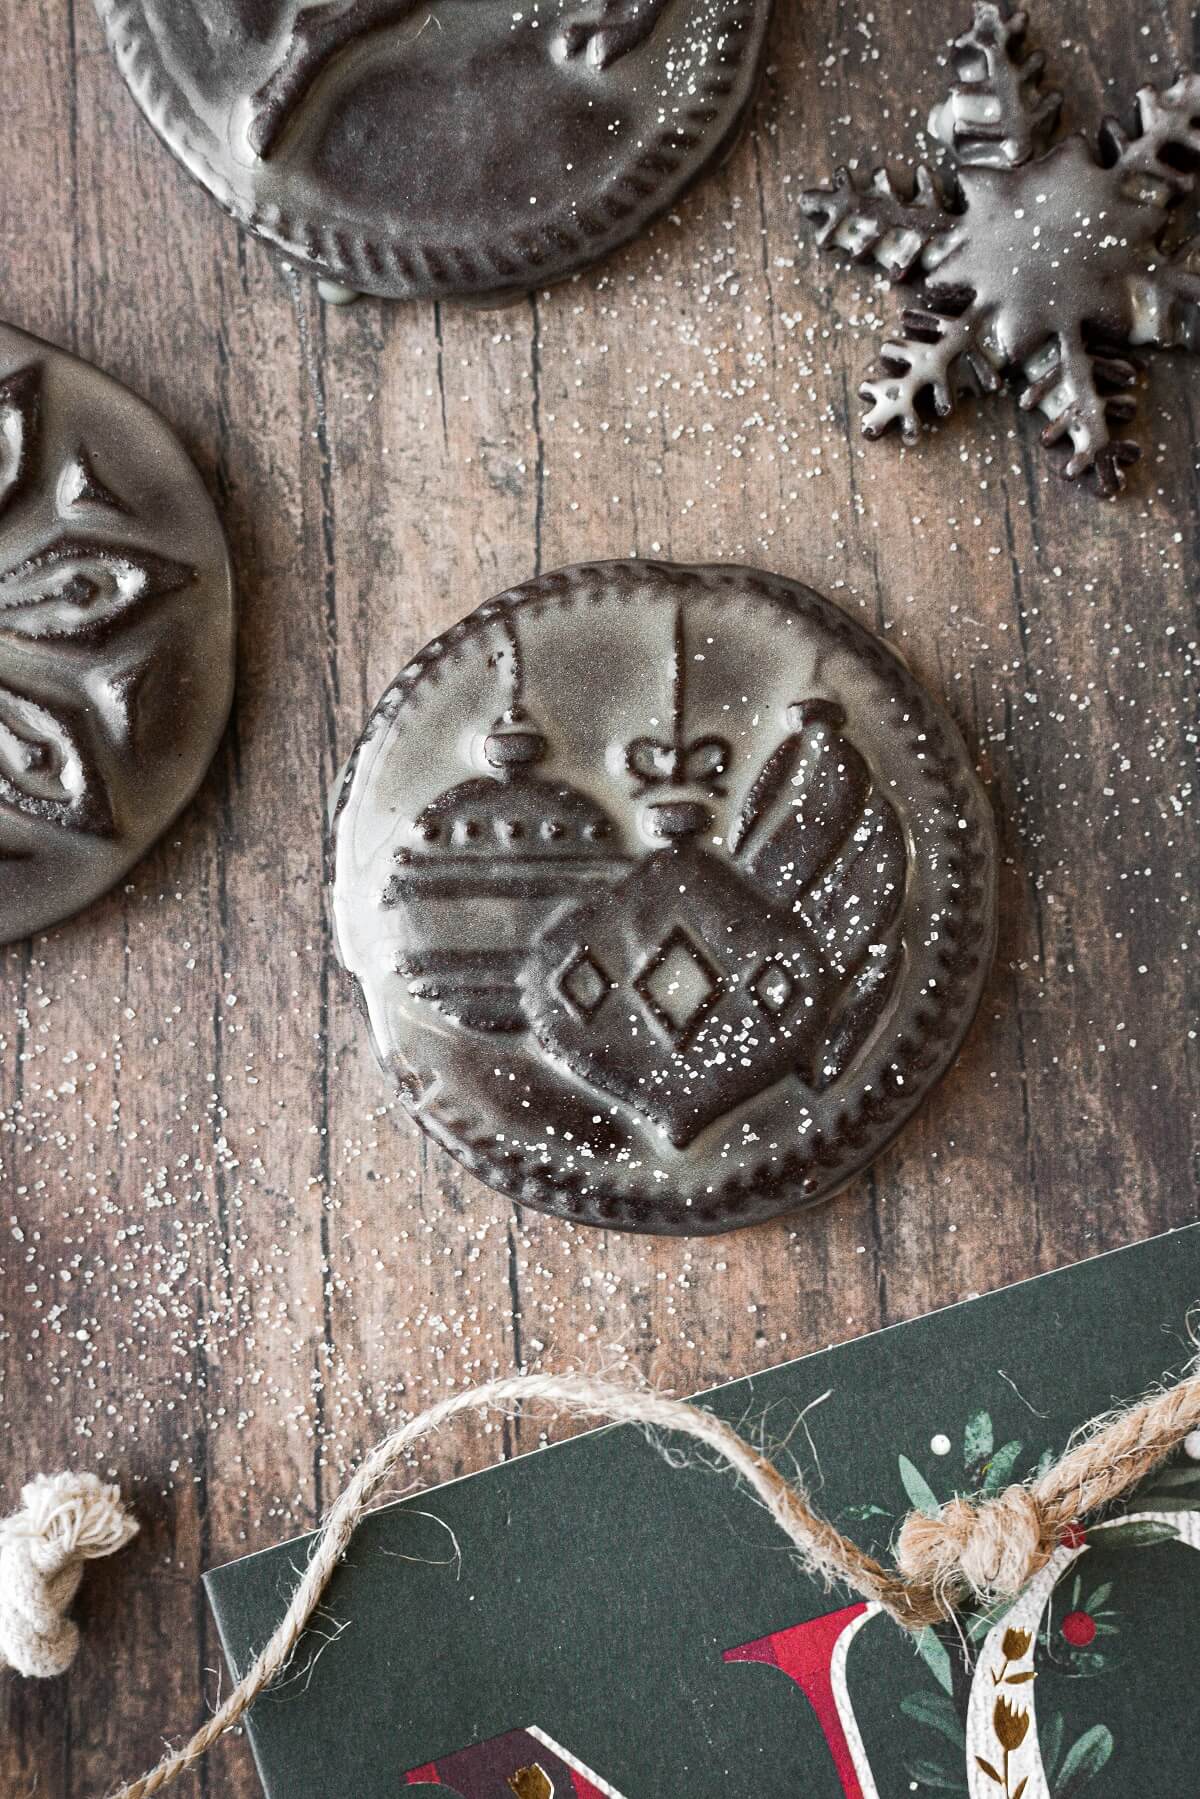 A chocolate Christmas cookie stamped with an ornament design and glazed in icing.